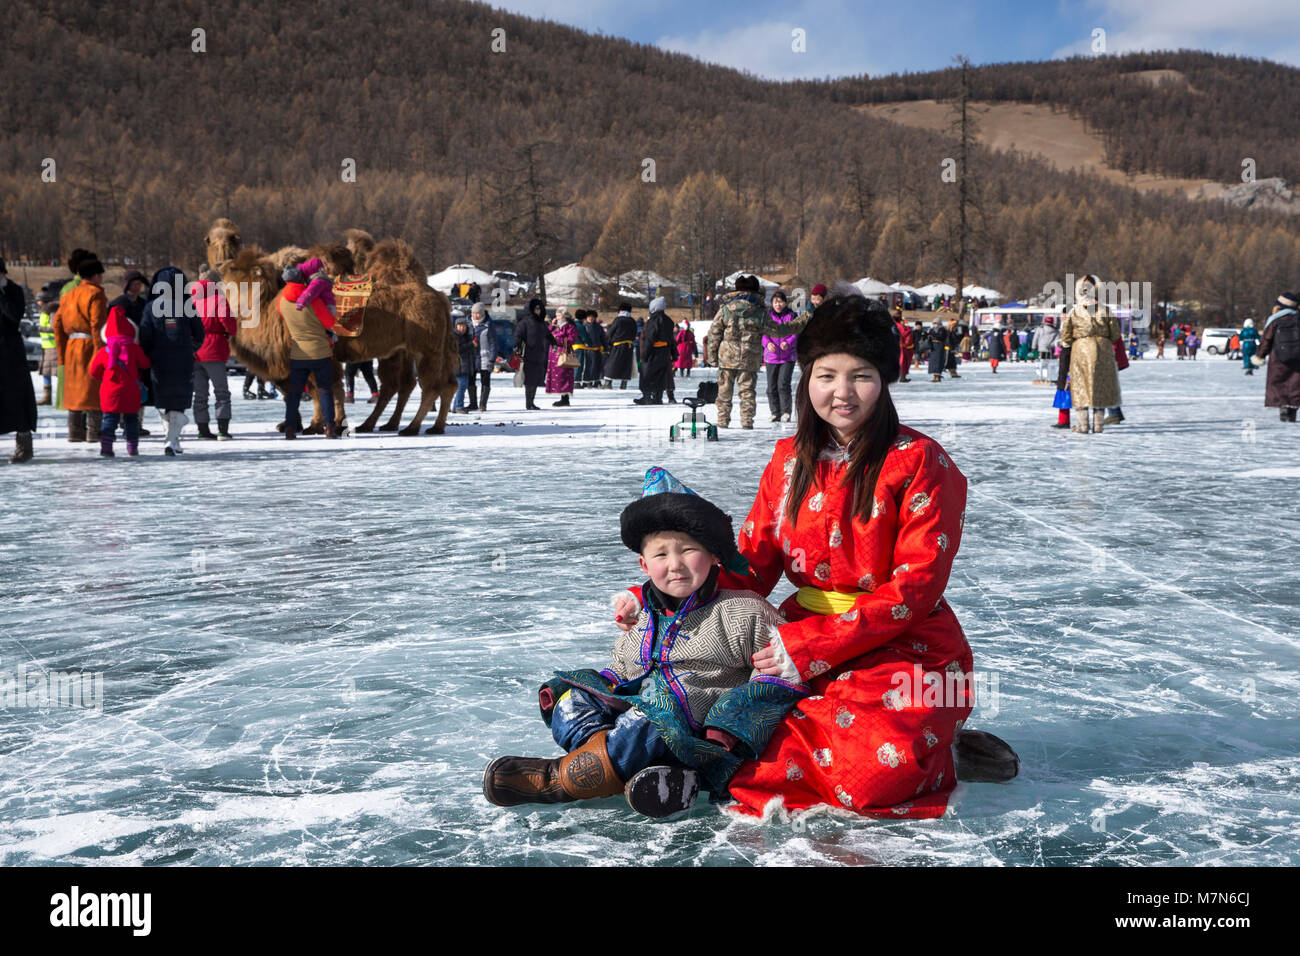 Hatgal, Mongolia, 3rd March 2018: mongolian people on a frozen lake Khuvsgul during a ice festival in winter Stock Photo